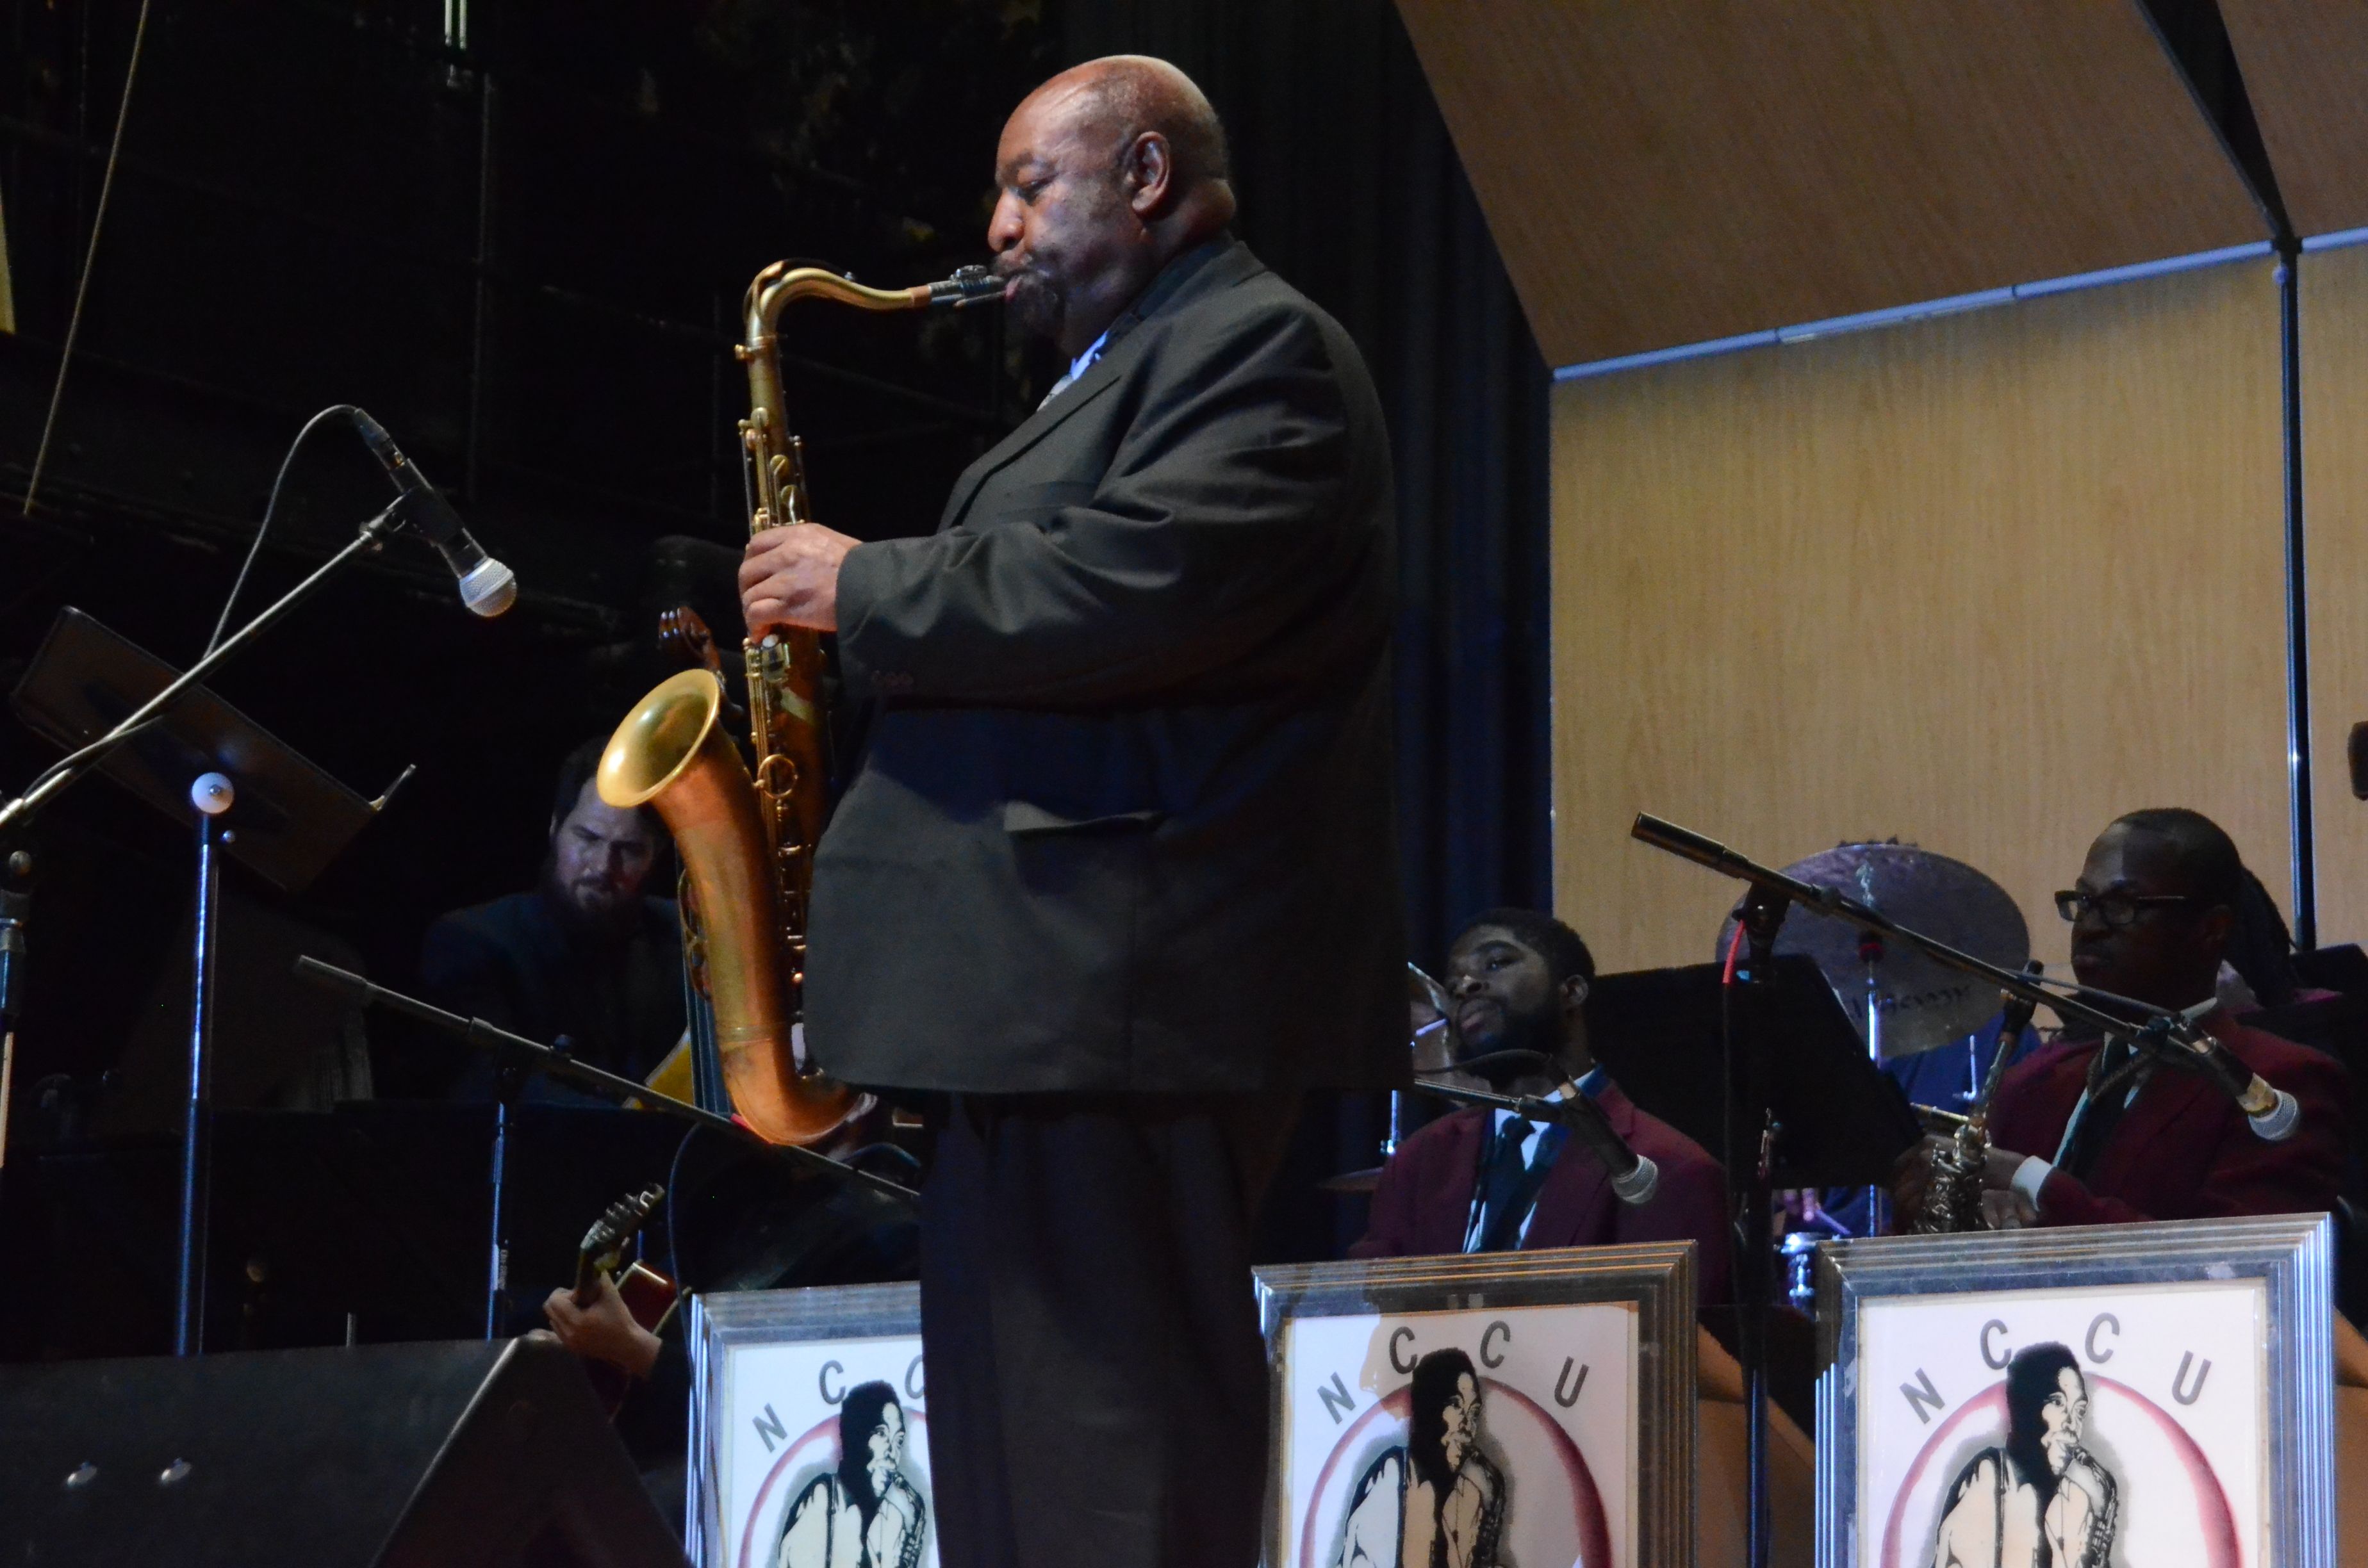 Ira Wiggins playing his sax on stage